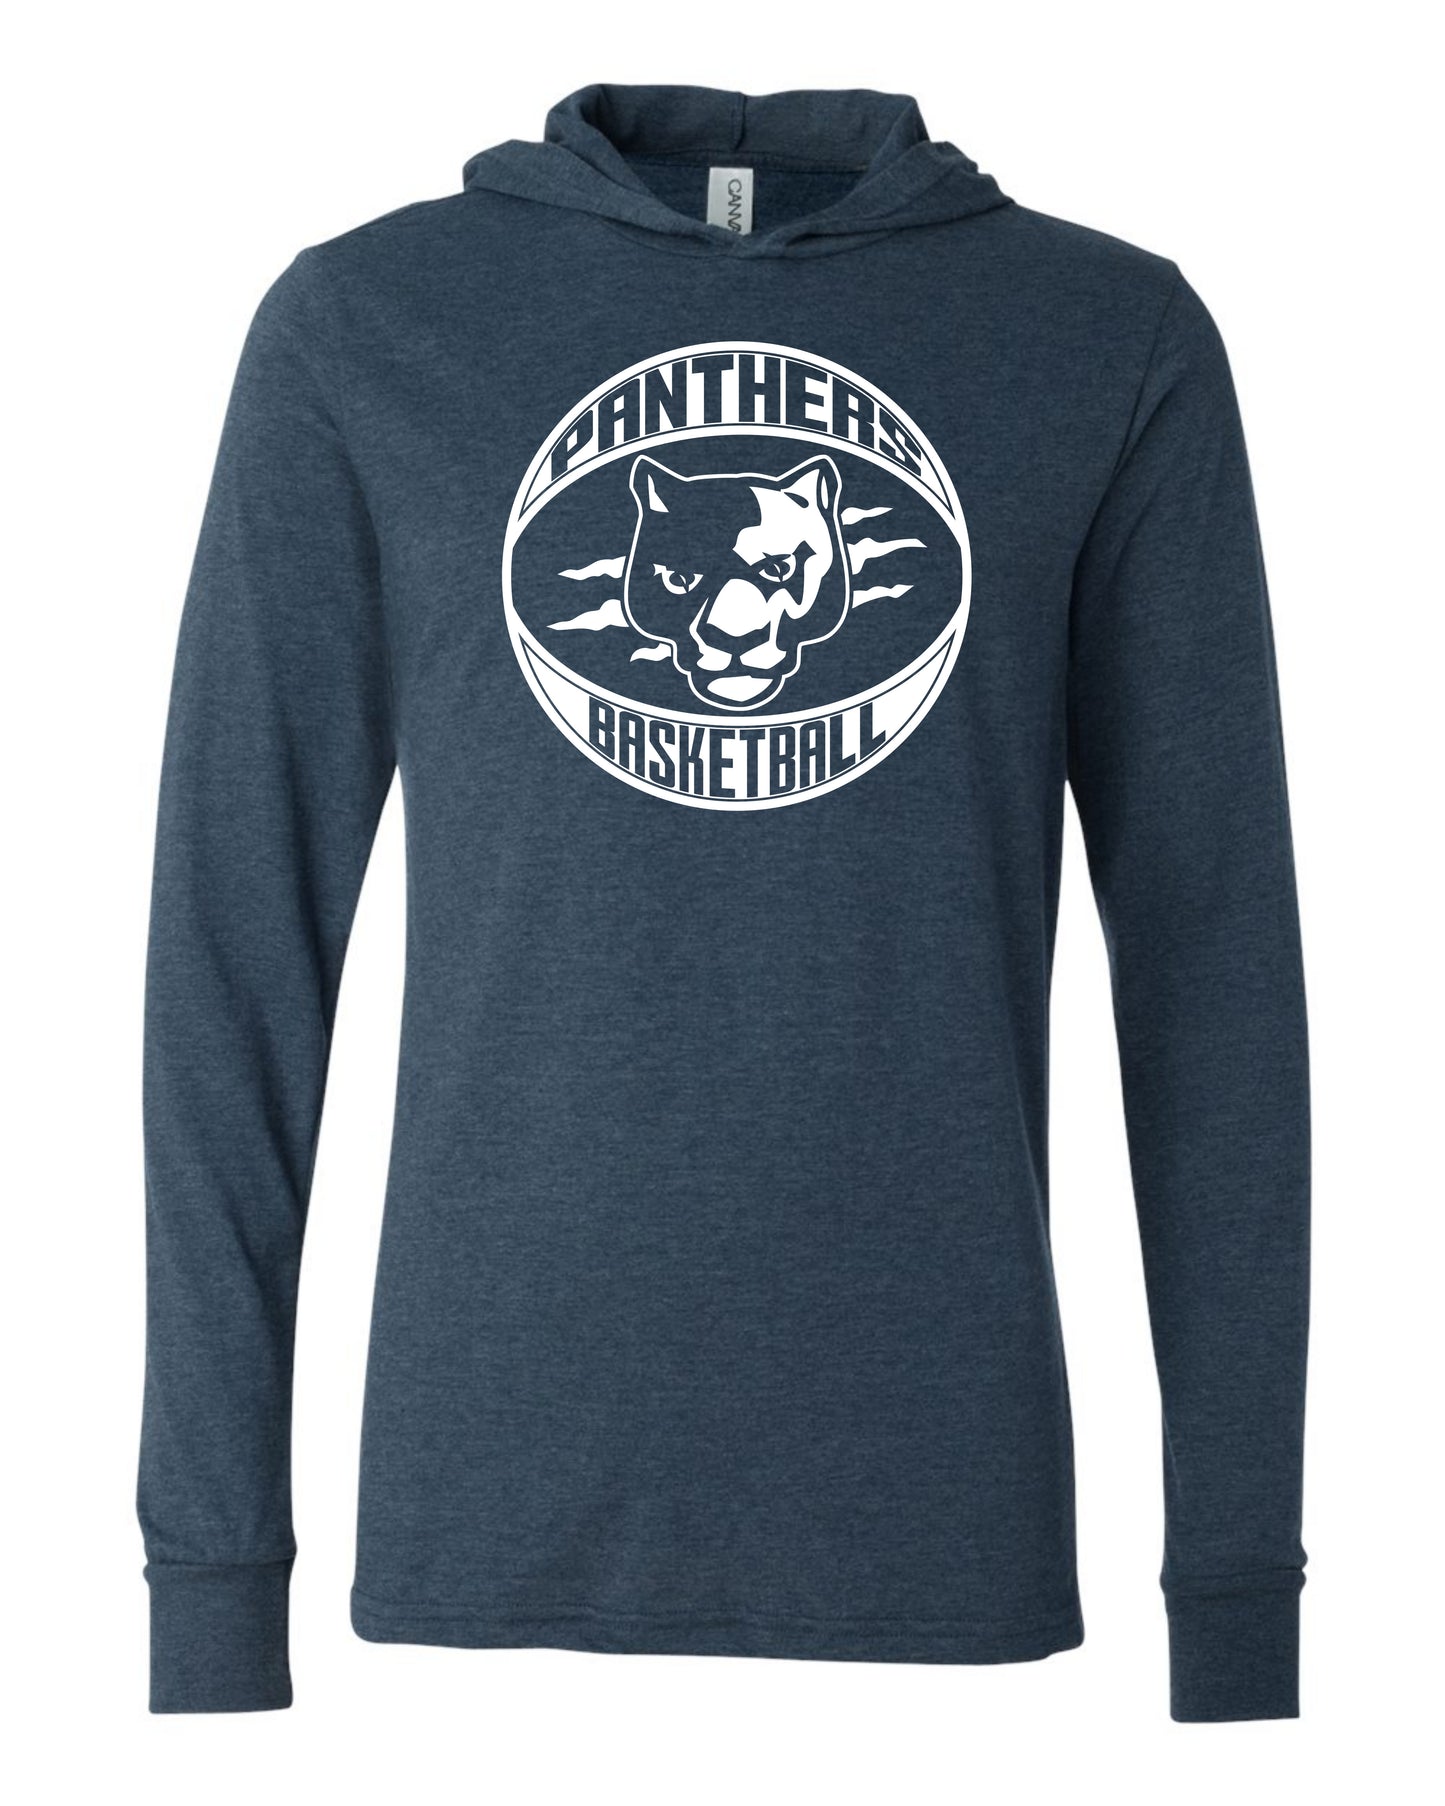 Panthers BBall Claw Ball - Adult Hooded Long Sleeve